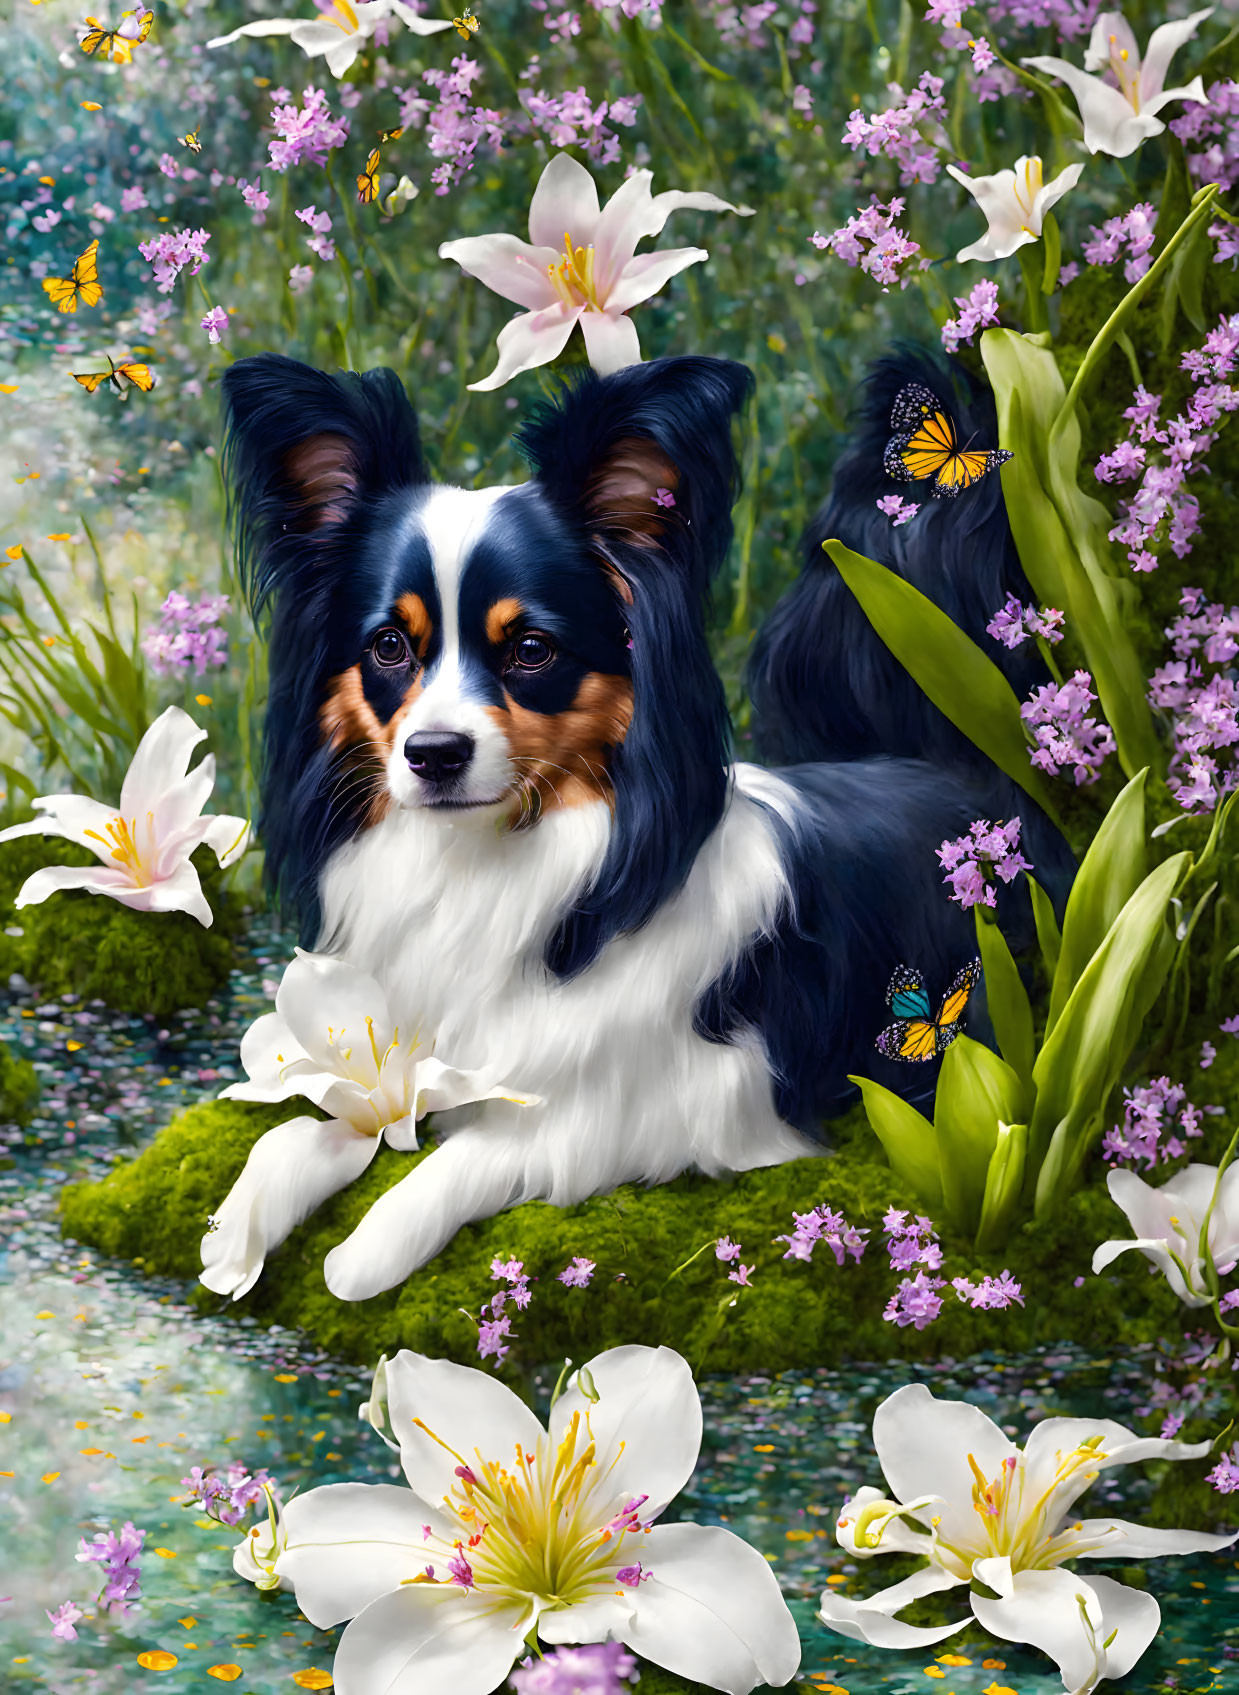 Tricolor Papillon Dog Surrounded by Vibrant Flowers and Butterflies